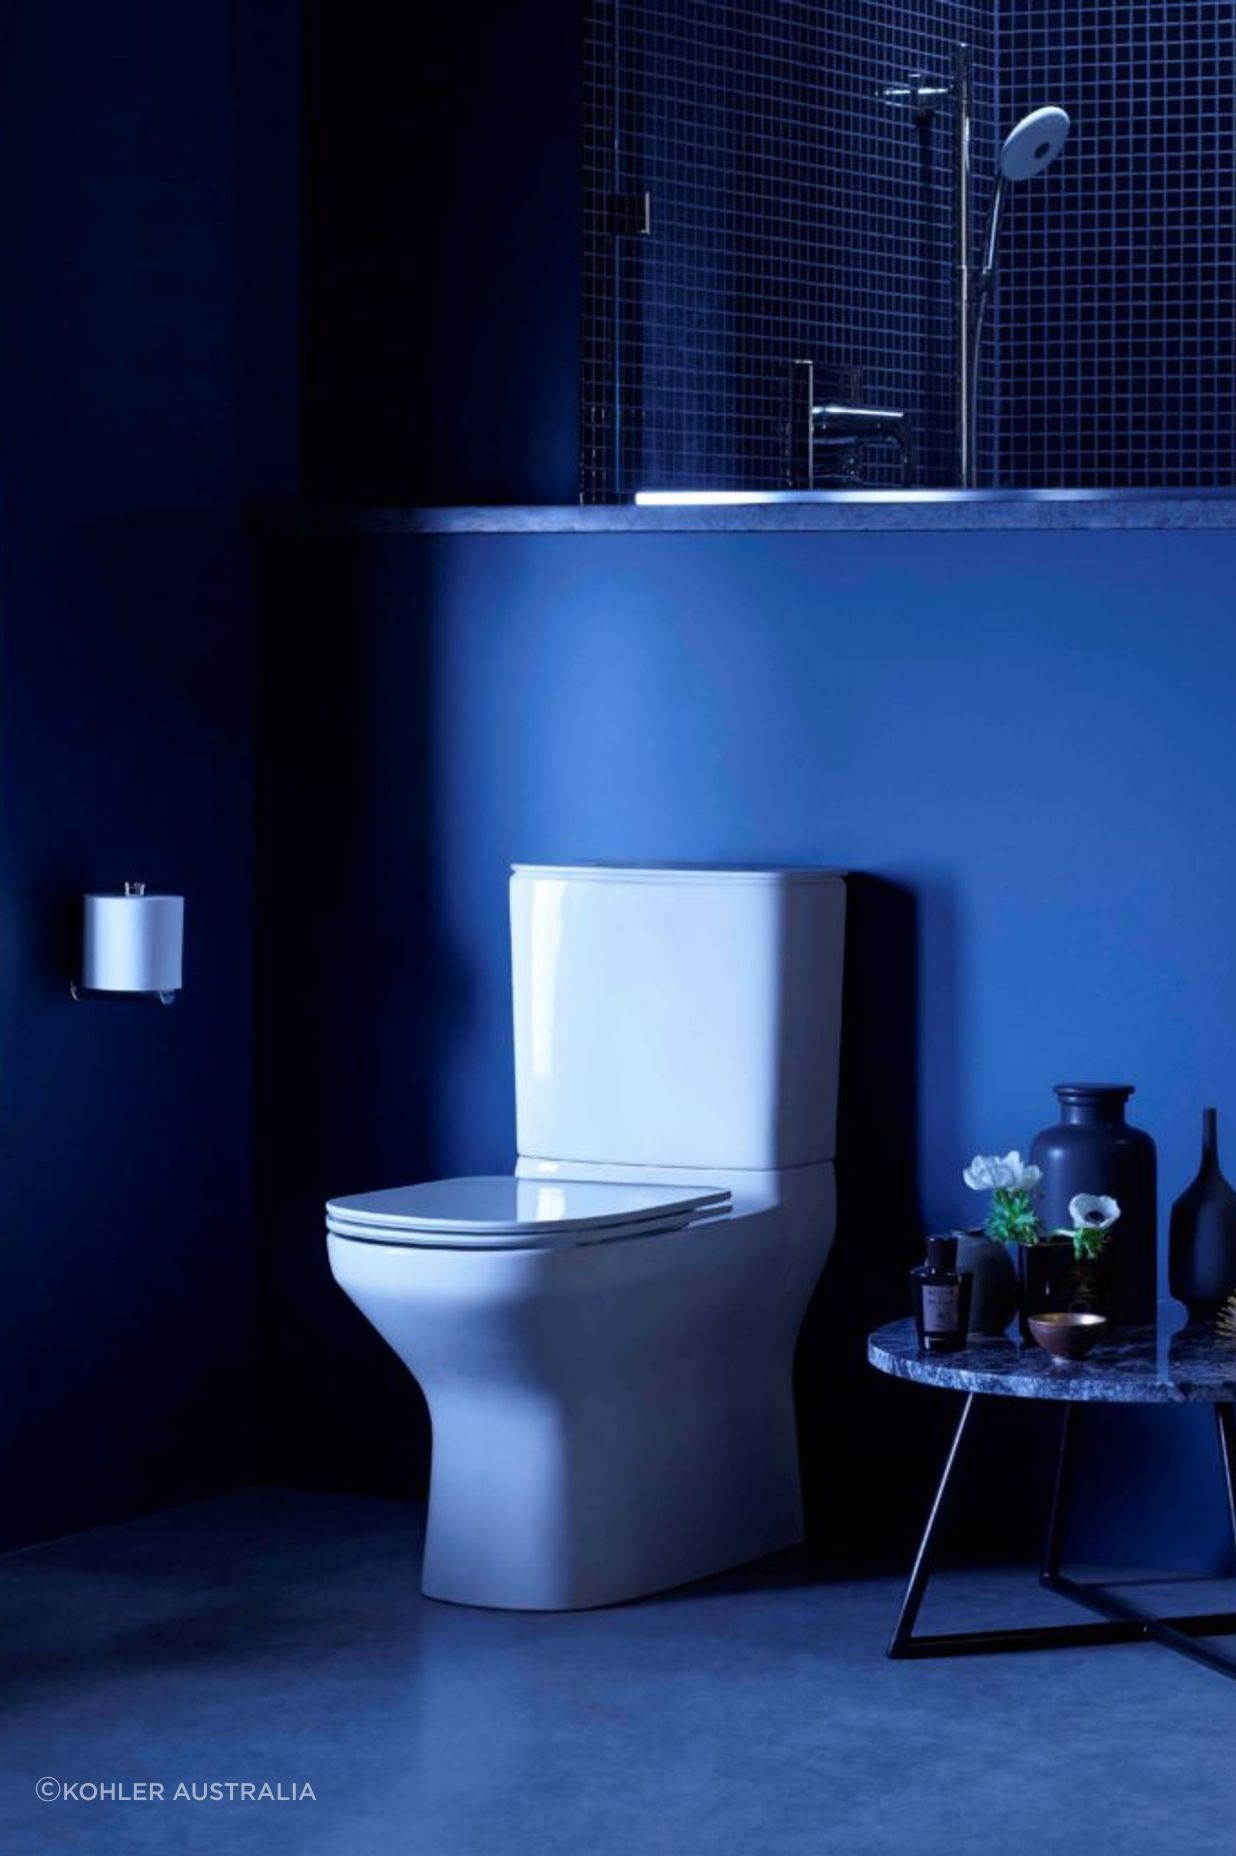 The Kohler Clean includes a host of smart features